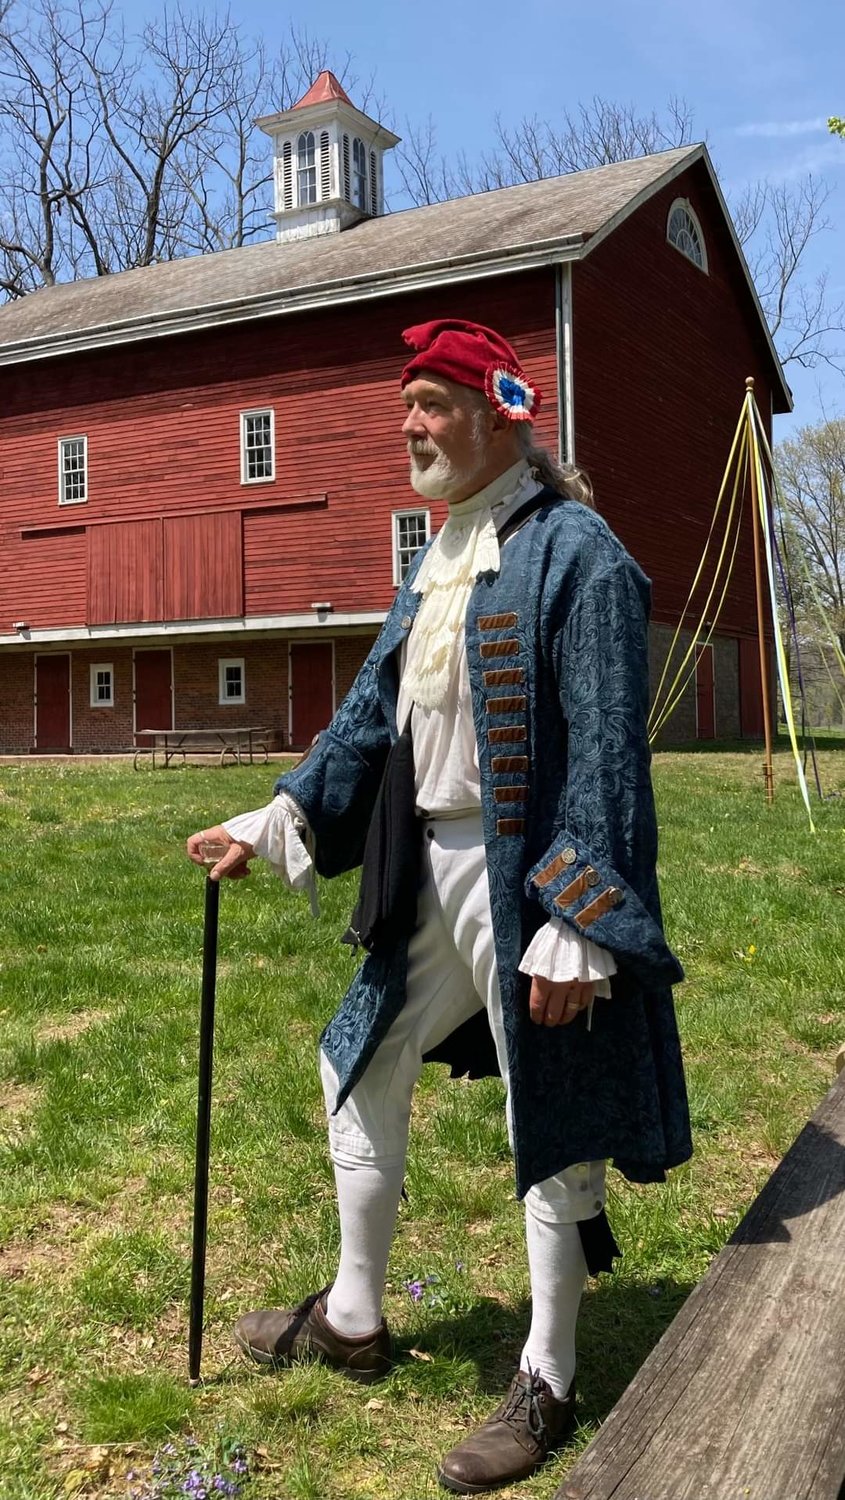 Reenactor Douglas Milne shows off his liberty cap. Caps like these were hoisted up atop the May Pole on May Day in the American Colonies a symbol of protest against the British during the Revolution.